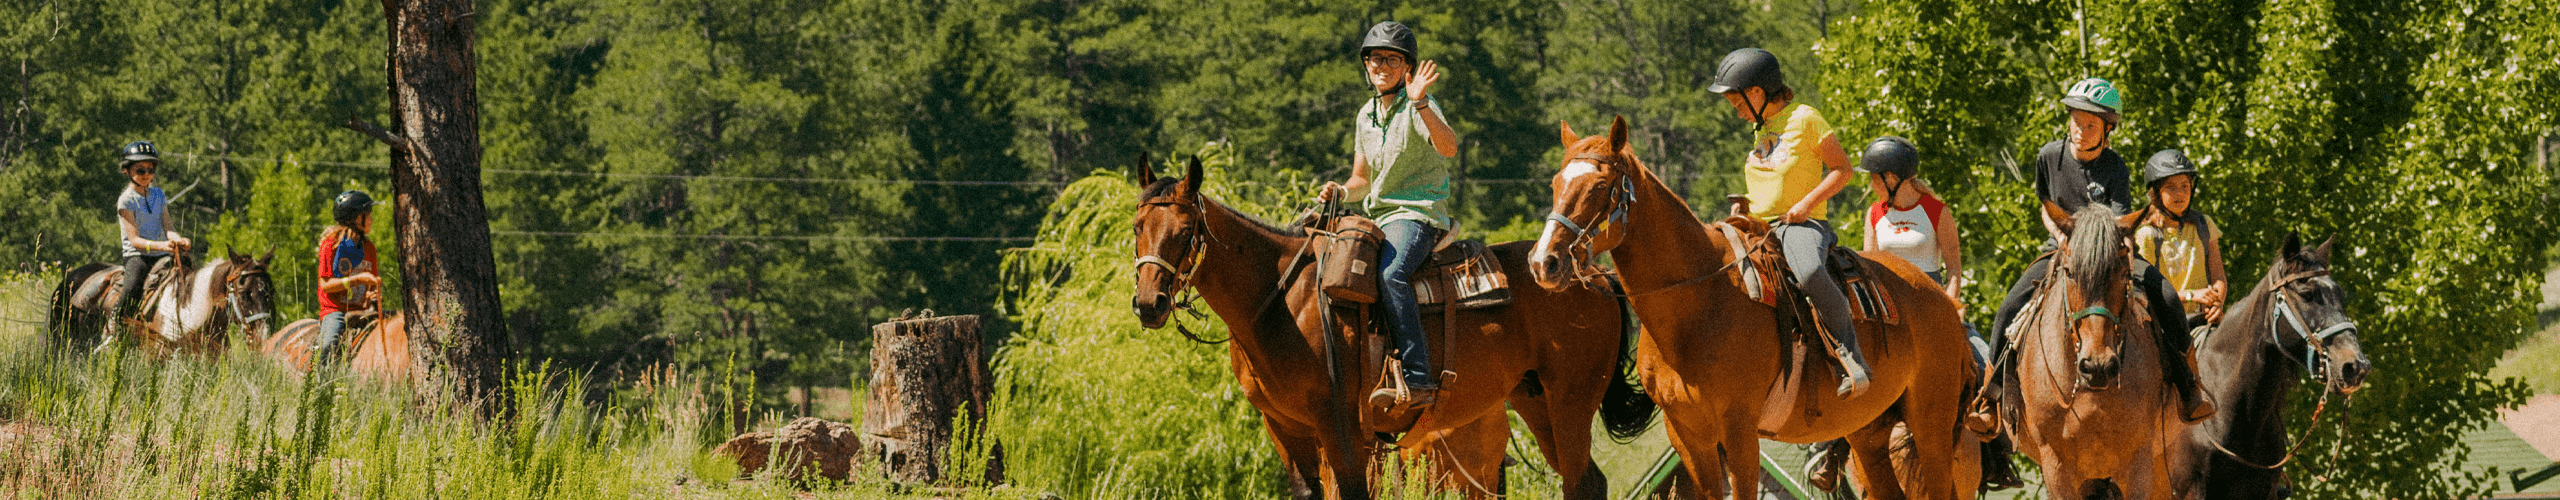 People riding horses and waving